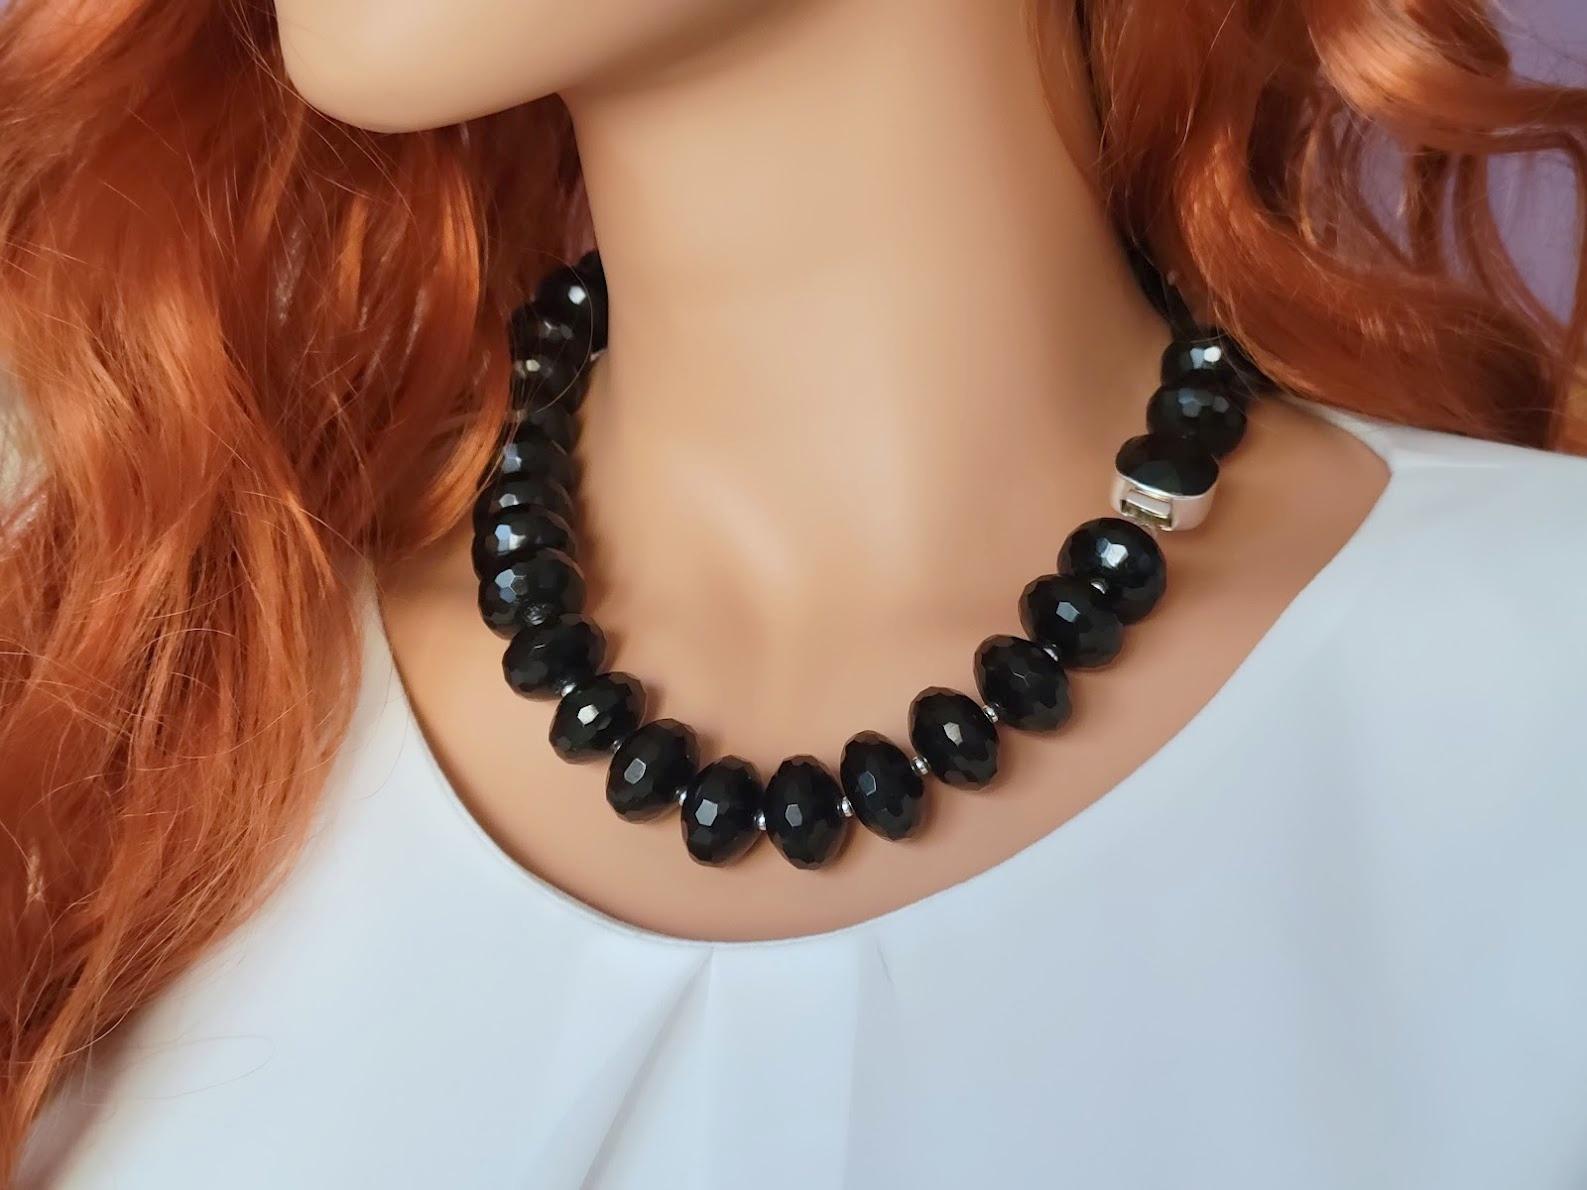 Black Onyx Necklace With Hand Painted Bead On Black Rectangular Agate For Sale 3